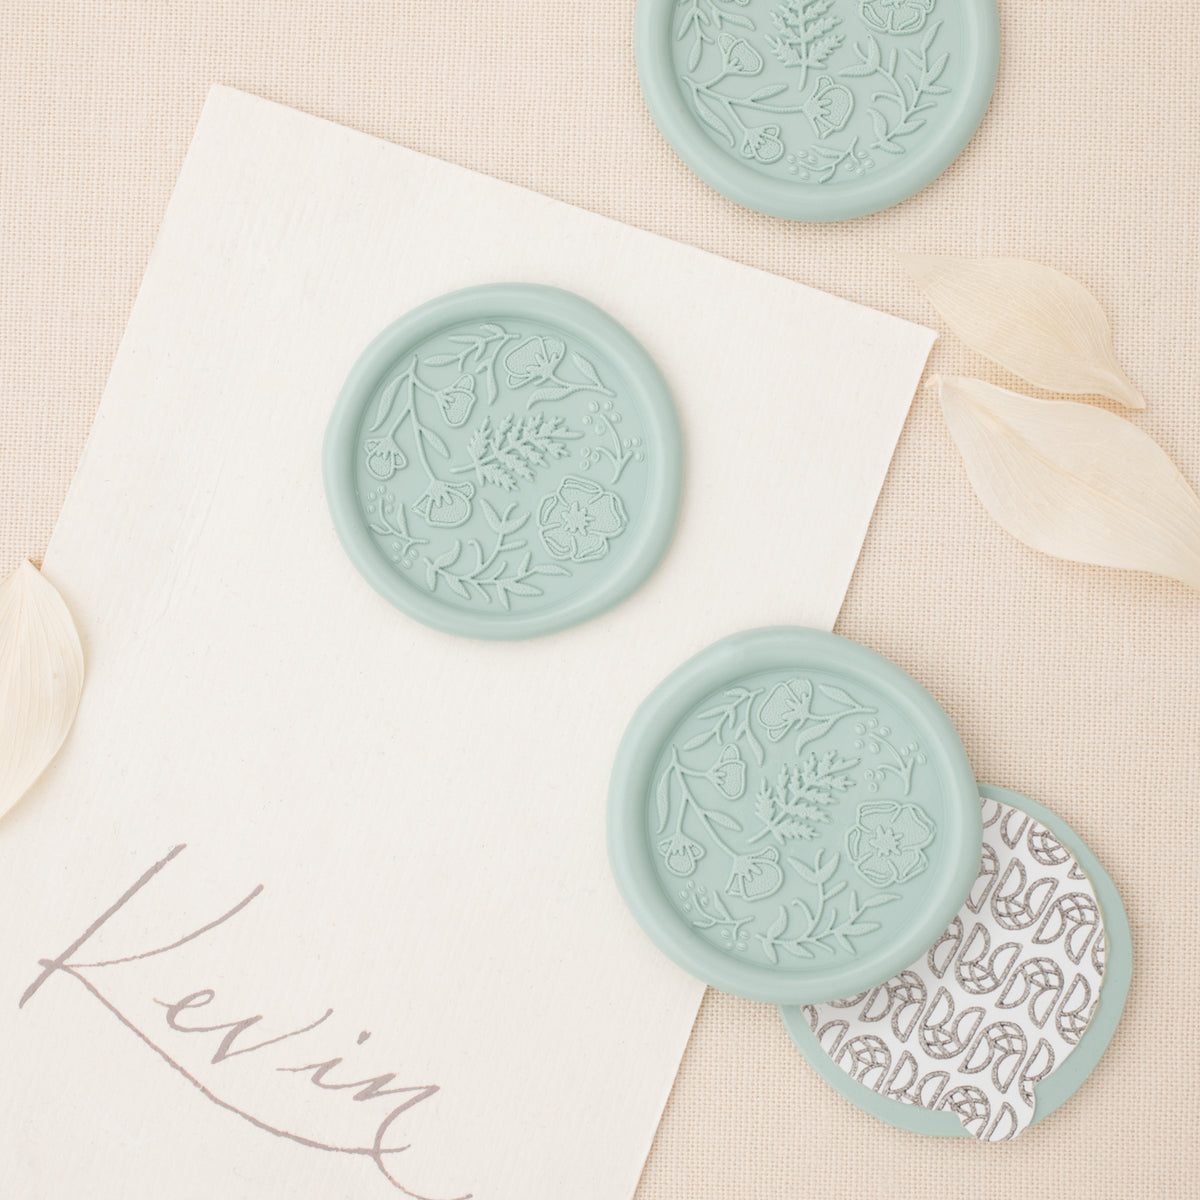 Self Adhesive Custom Monogram Wax Seal Stickers â€“ expertly hand crafted  for you from genuine sealing wax, mailable and flexible and ready to go in  the mail.